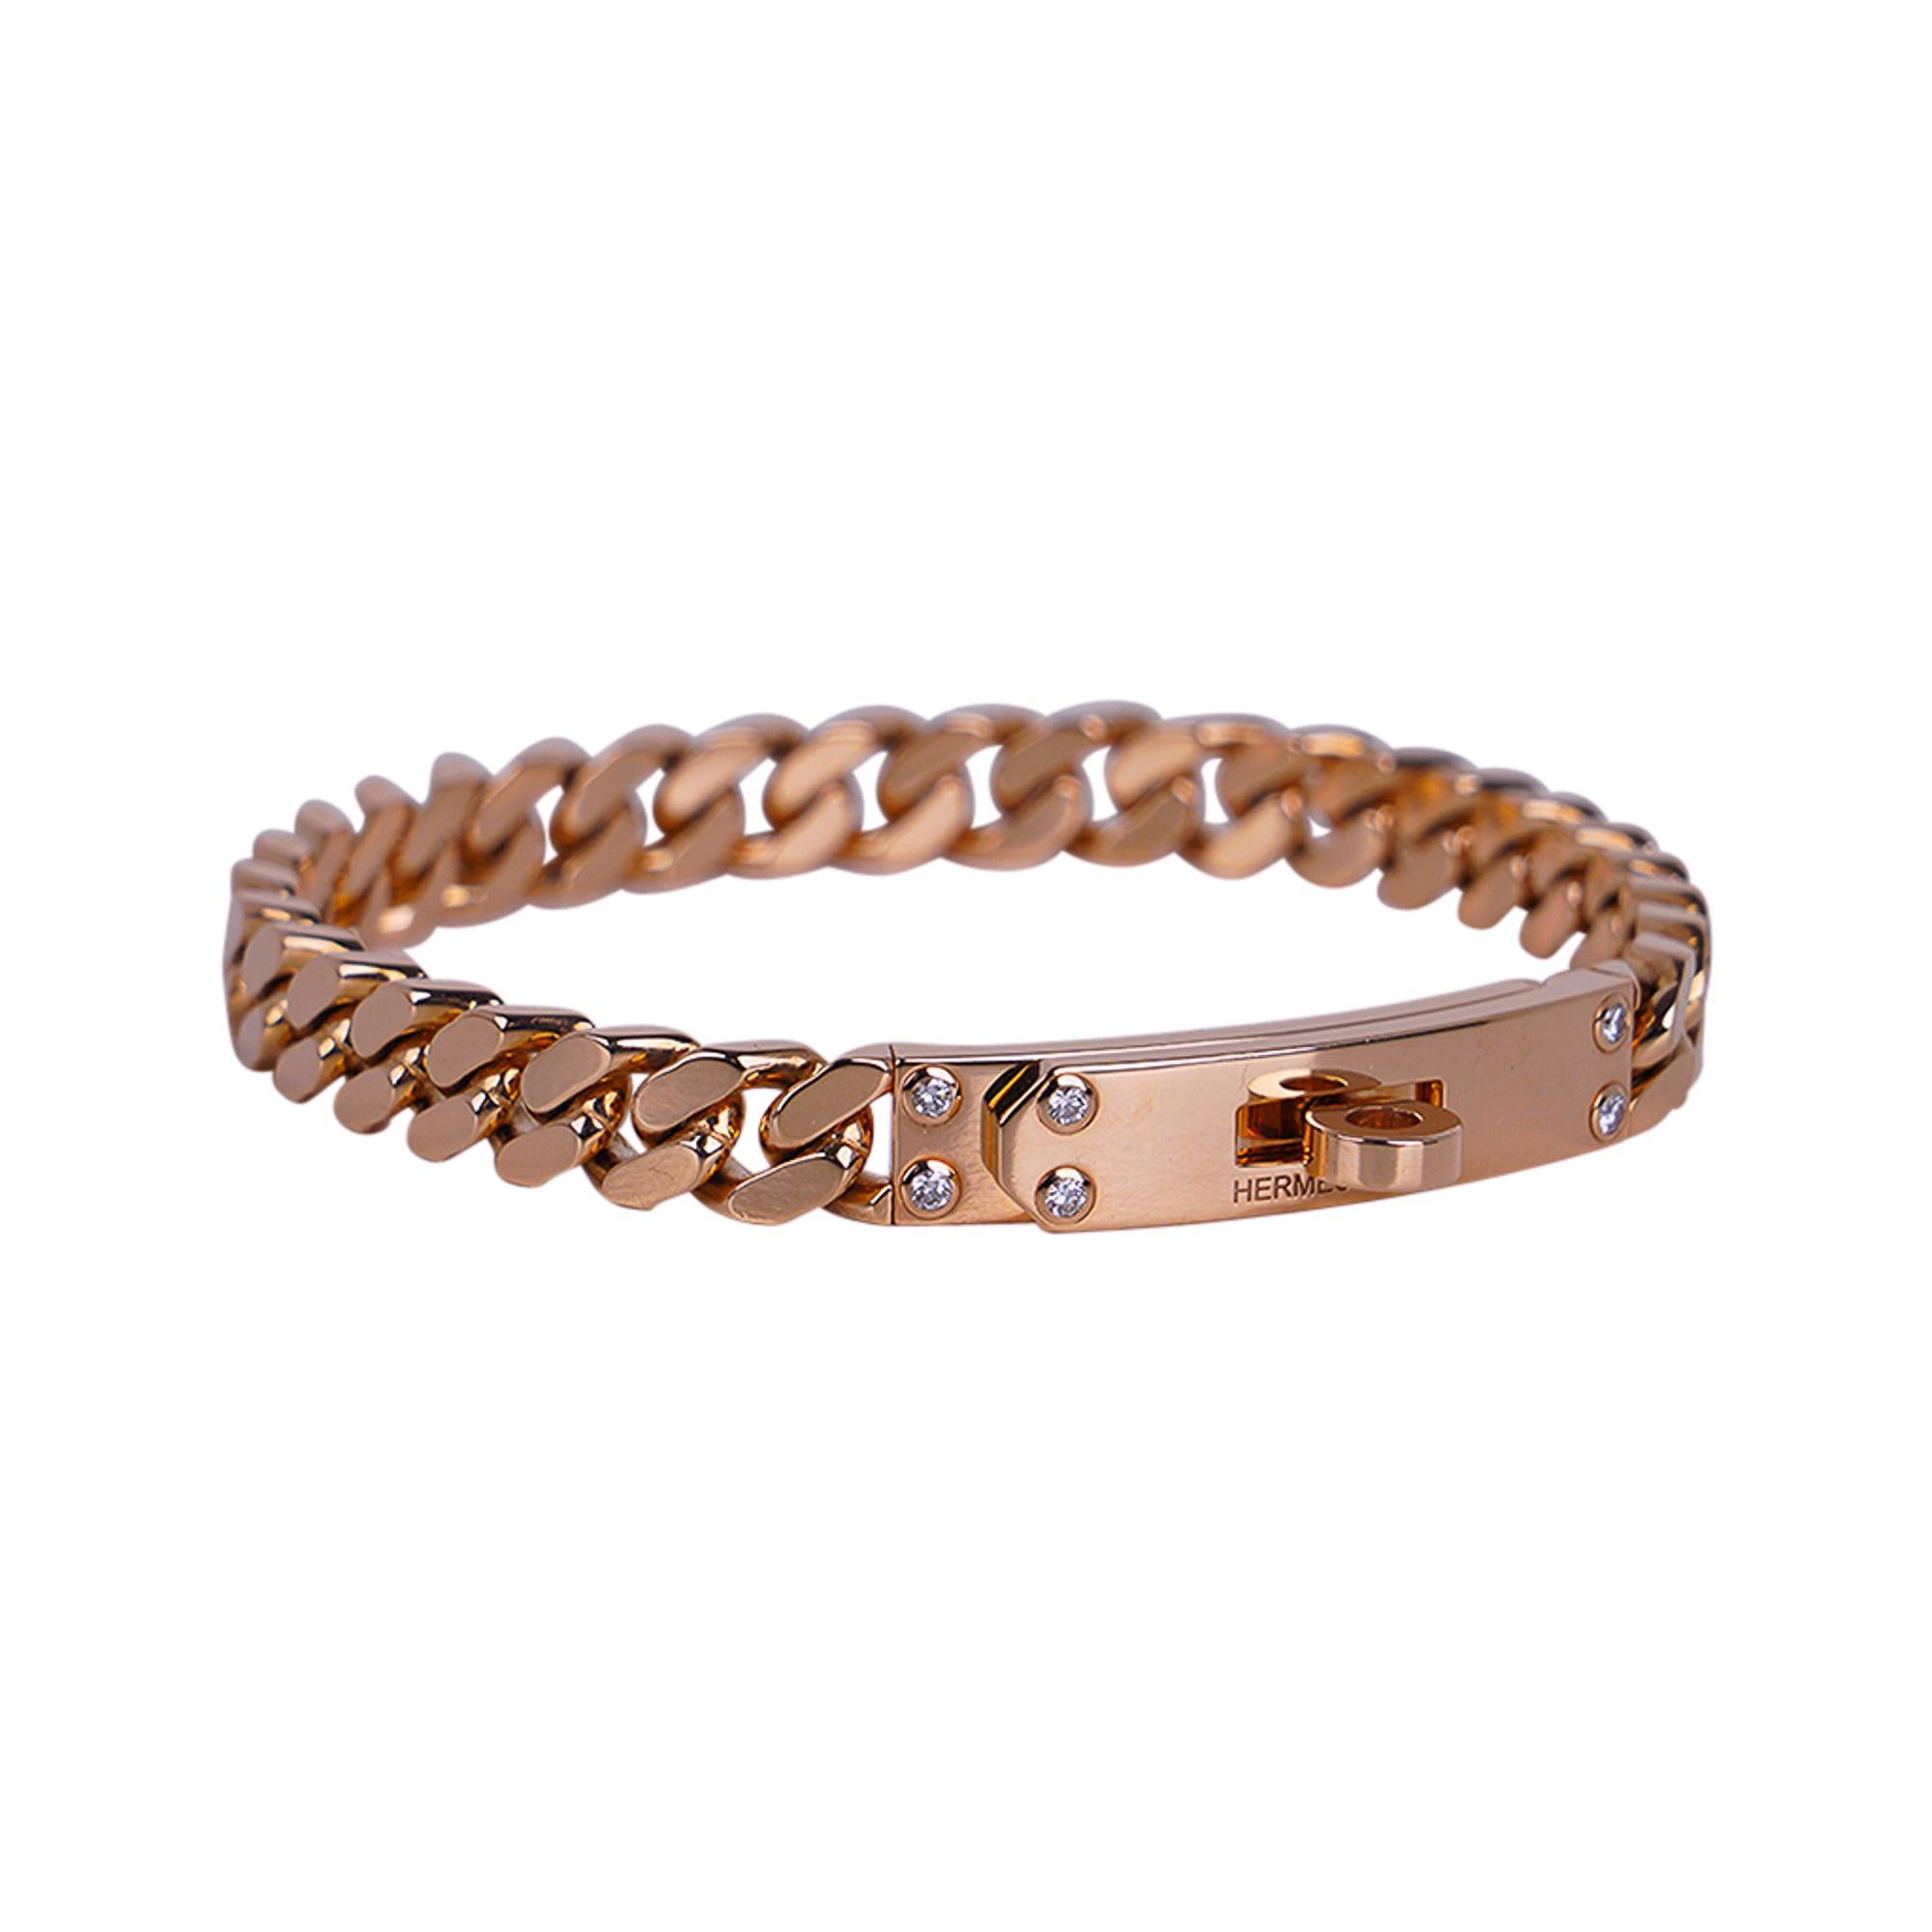 Mightychic offers an Hermes Kelly Gourmette Bracelet very small model.
Featured in 18k Rose gold with 6 round brilliant cut diamonds.
Curb chain is inspired by Hermes' equestrian roots.
With the iconic Hermes Kelly turn clasp.
This beautiful Hermes